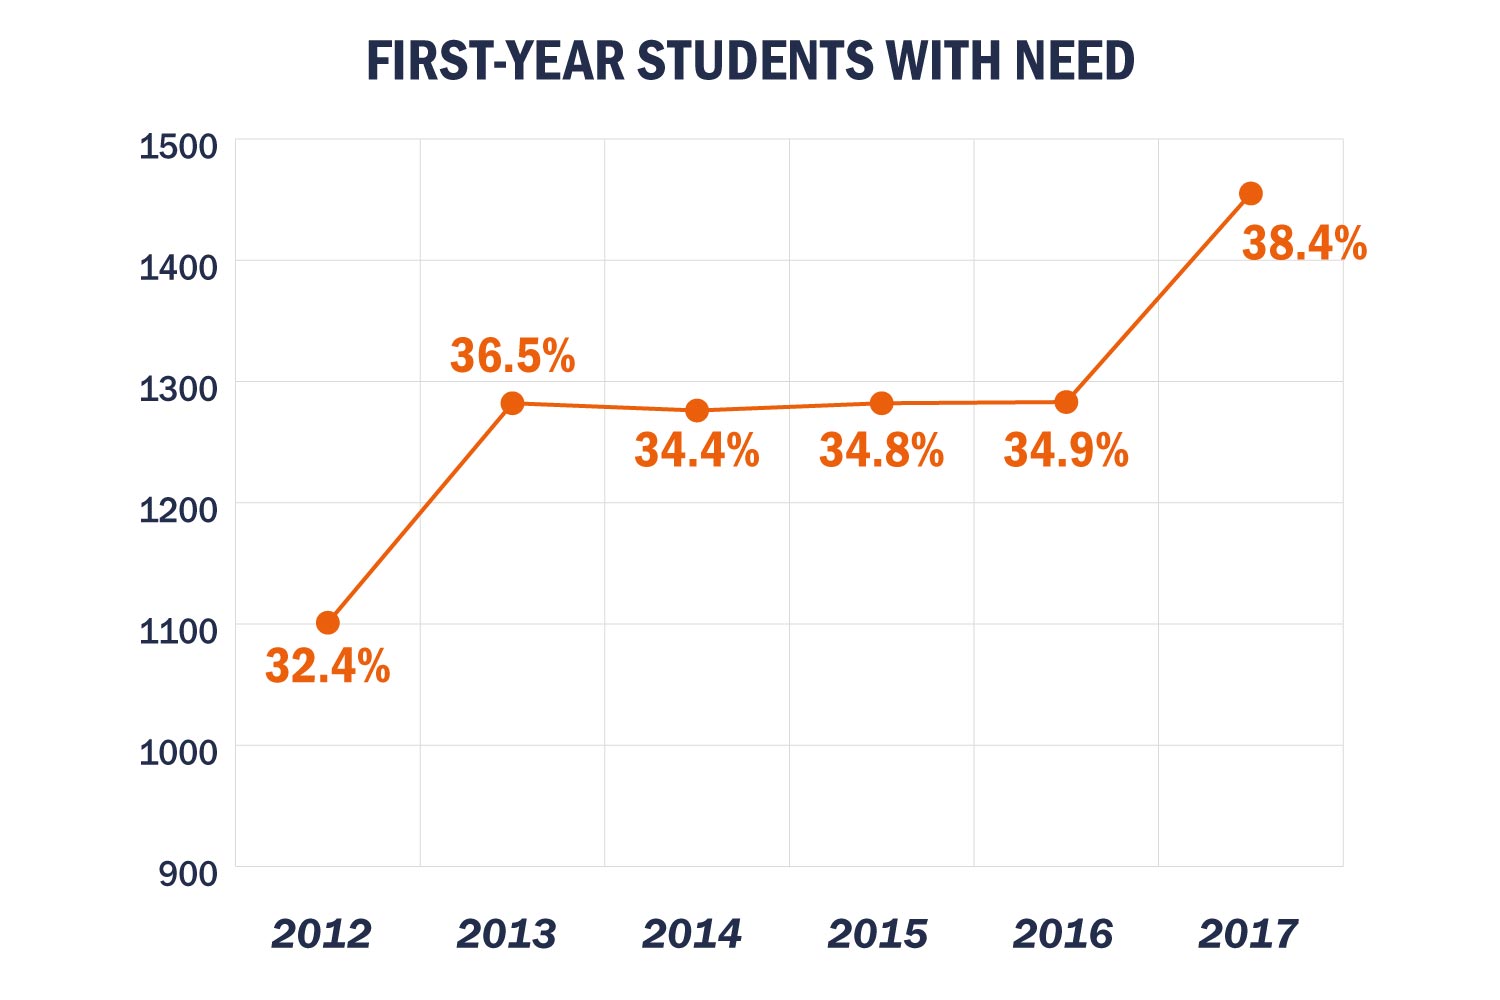 Line Chart of First-year students with need.  2012: 32.4%, 2013: 36.5%, 2014: 24.4%, 2015 34.8%, 2016: 34.9%, 2017: 38.4%